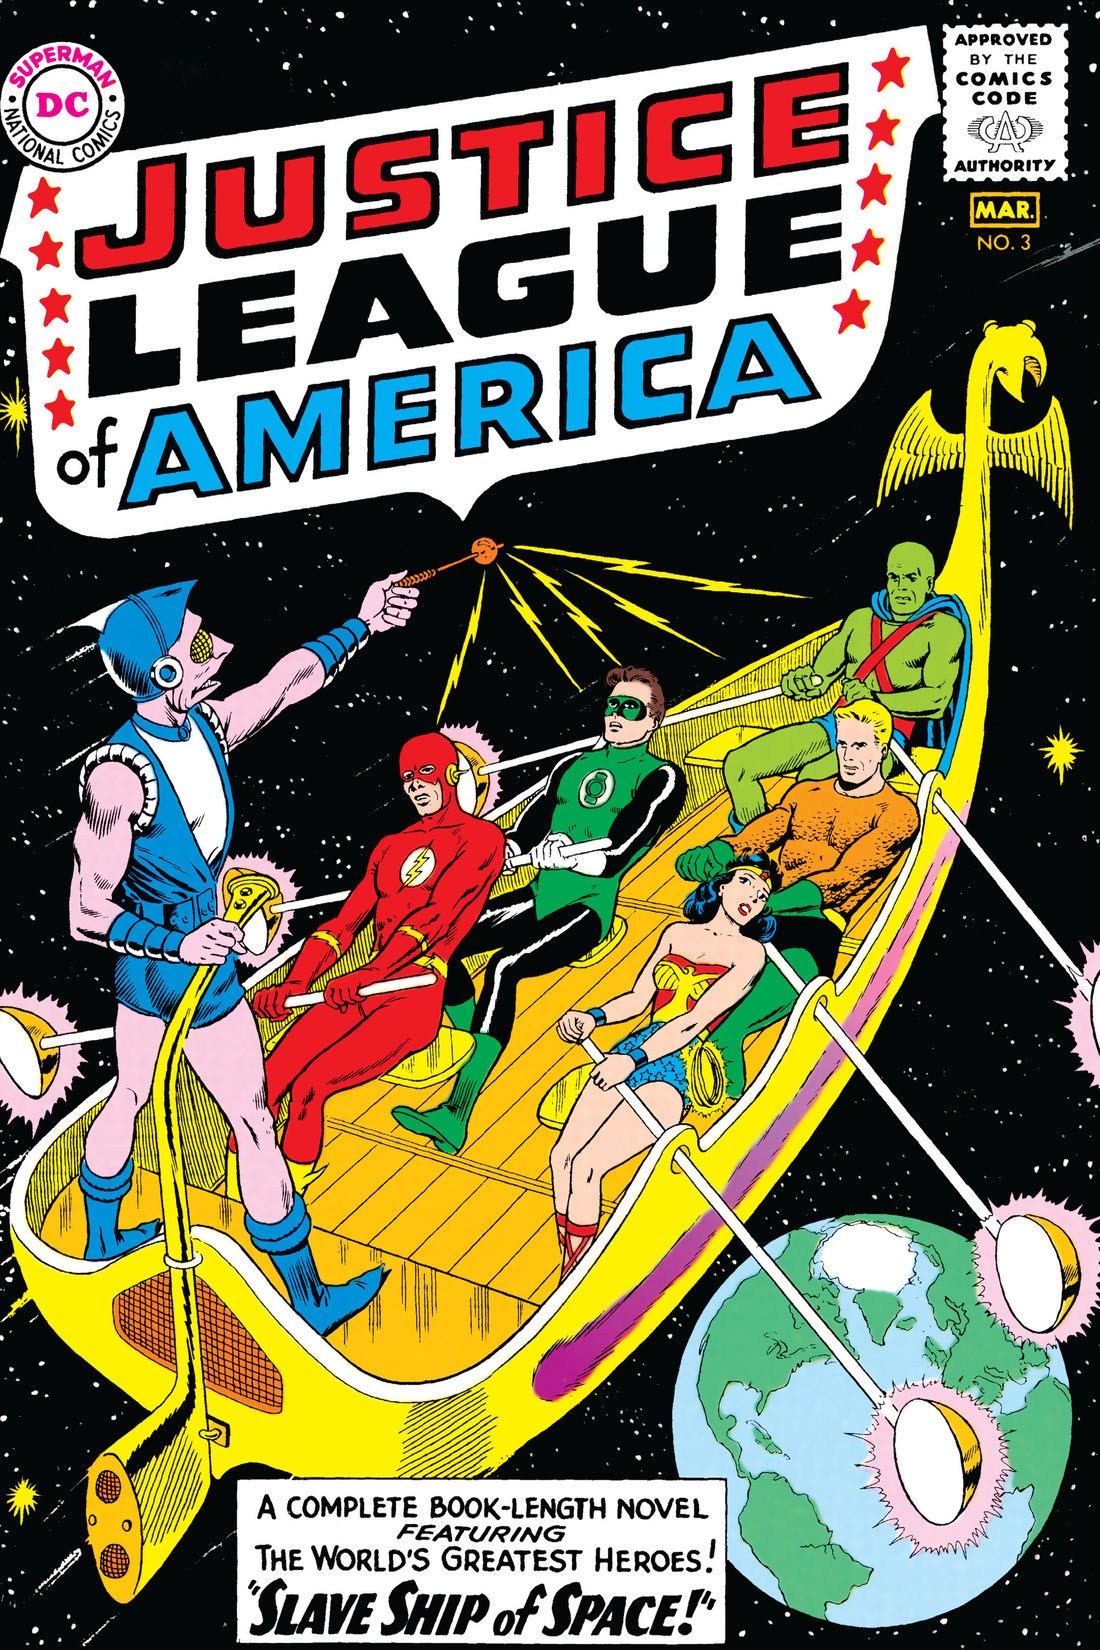 Justice League of America (1960-) #3 preview images